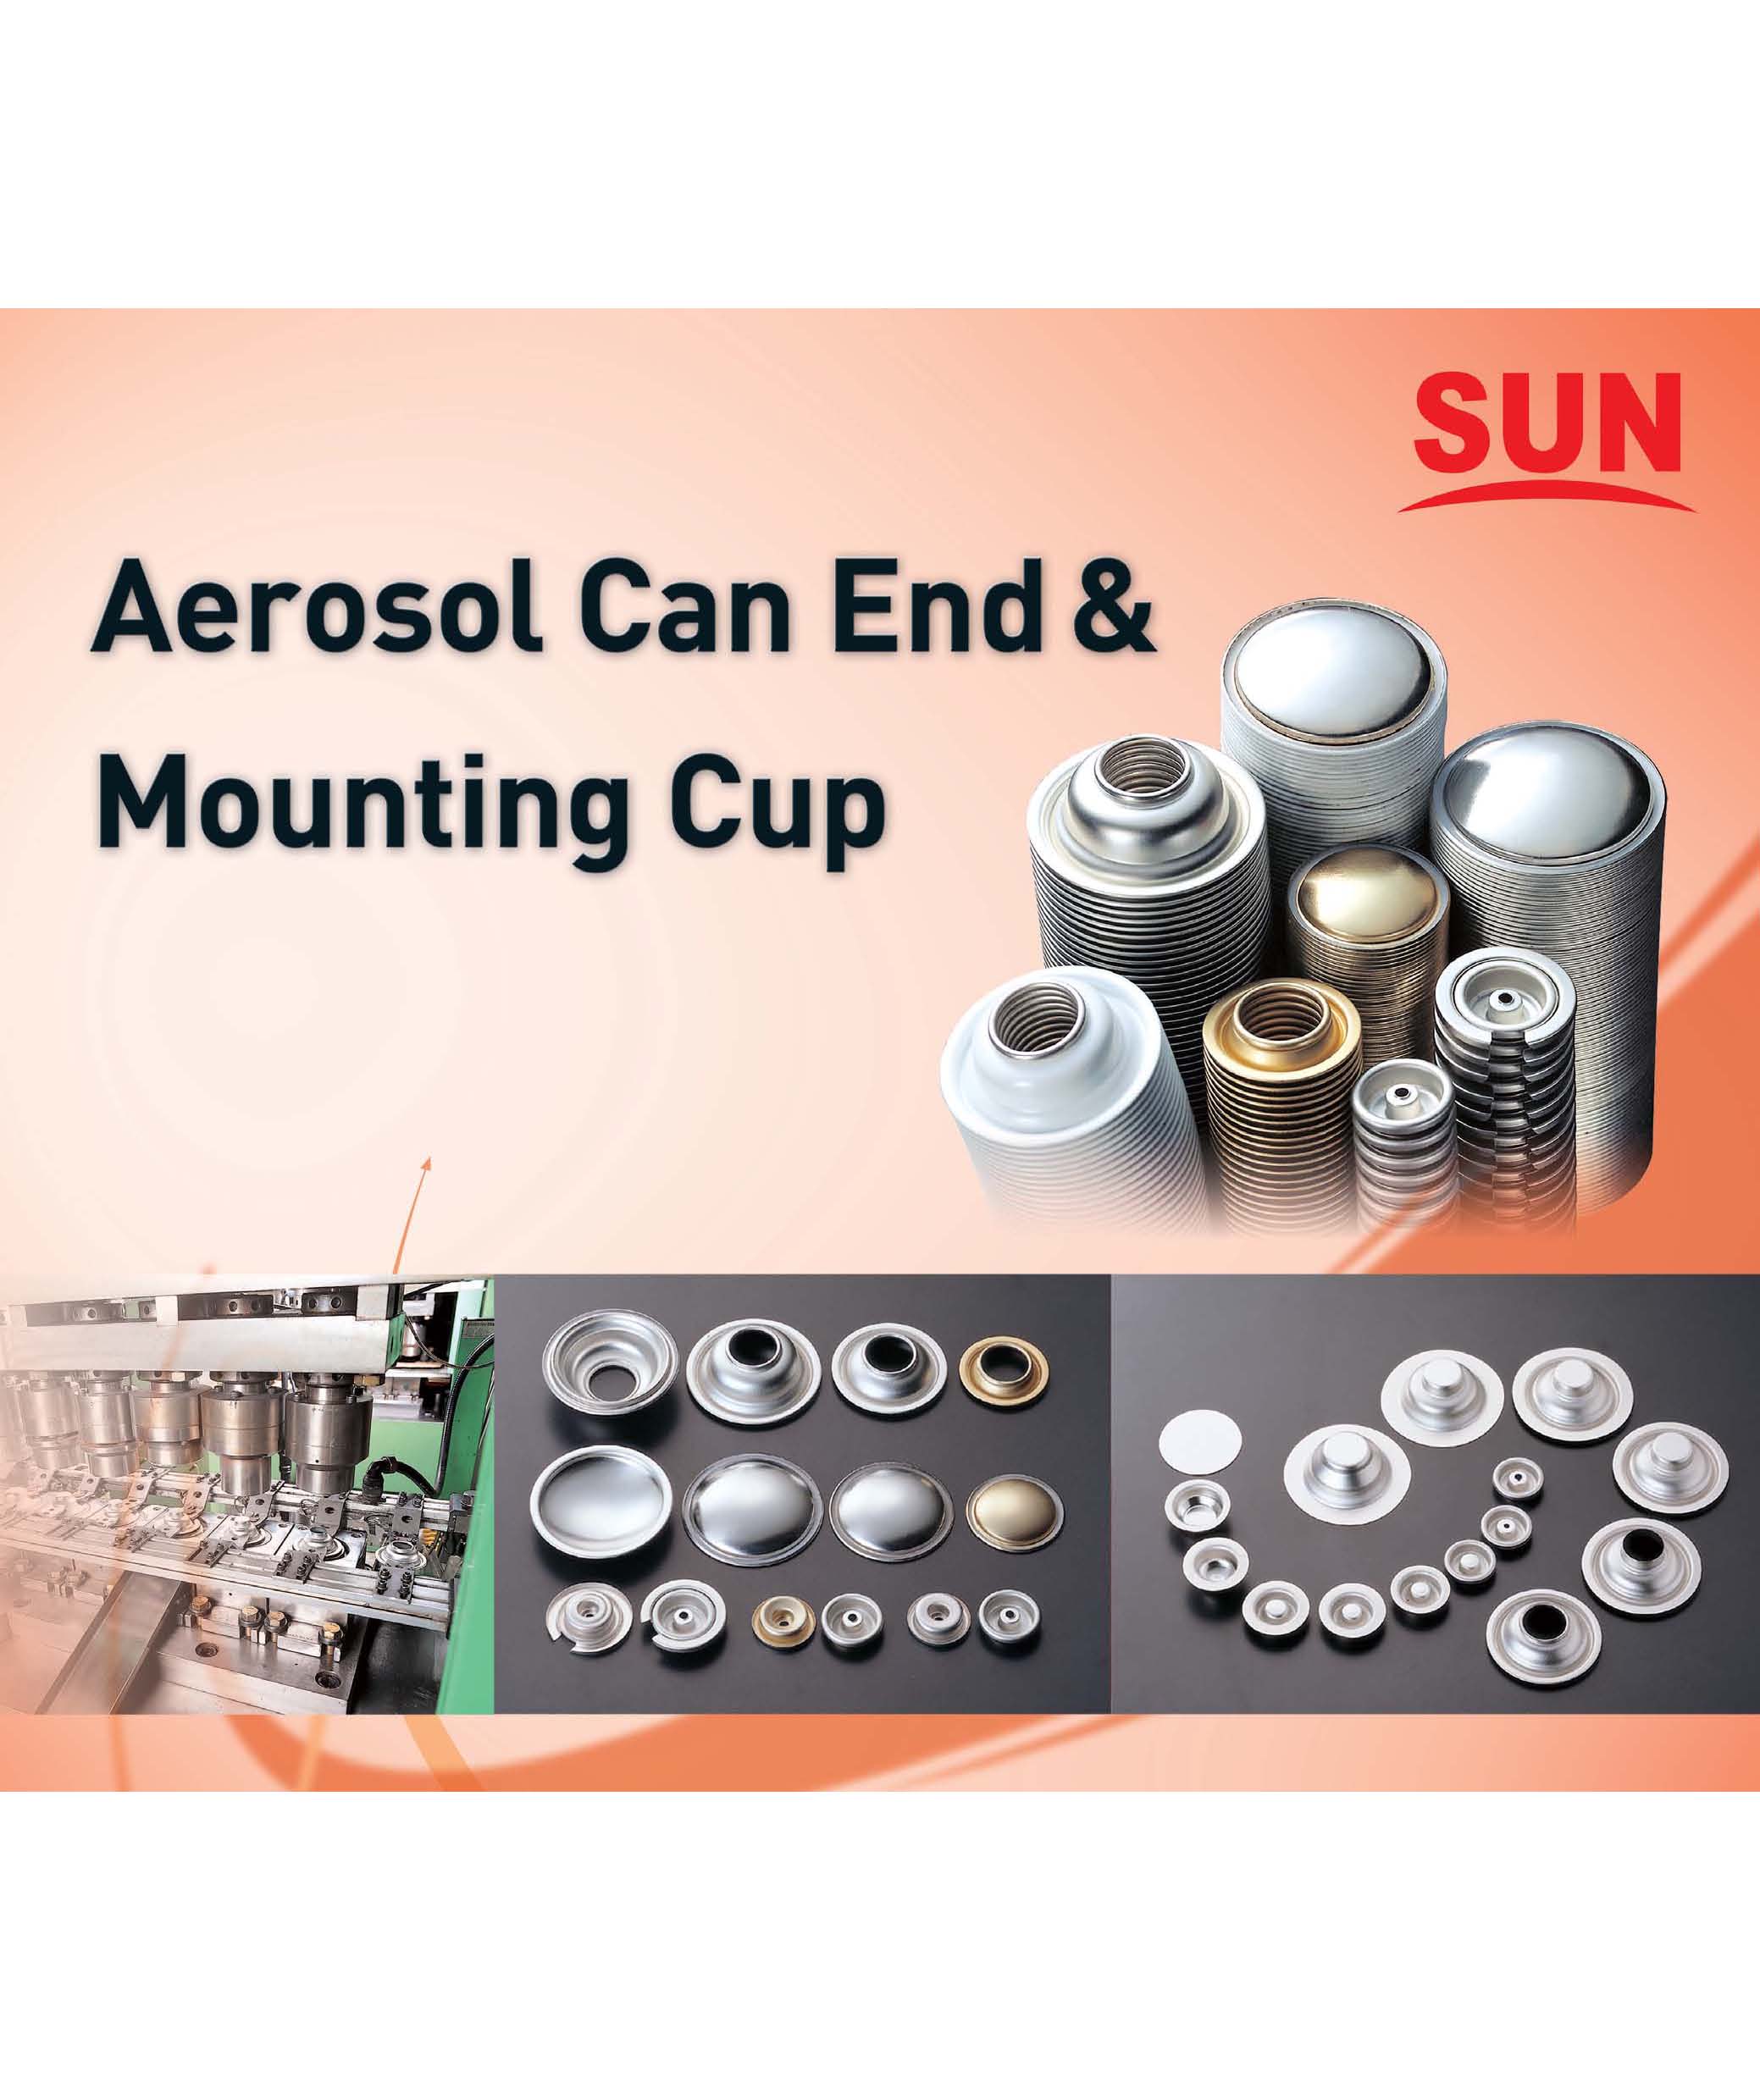 AEROSOL CAN END & MOUNTING CUP